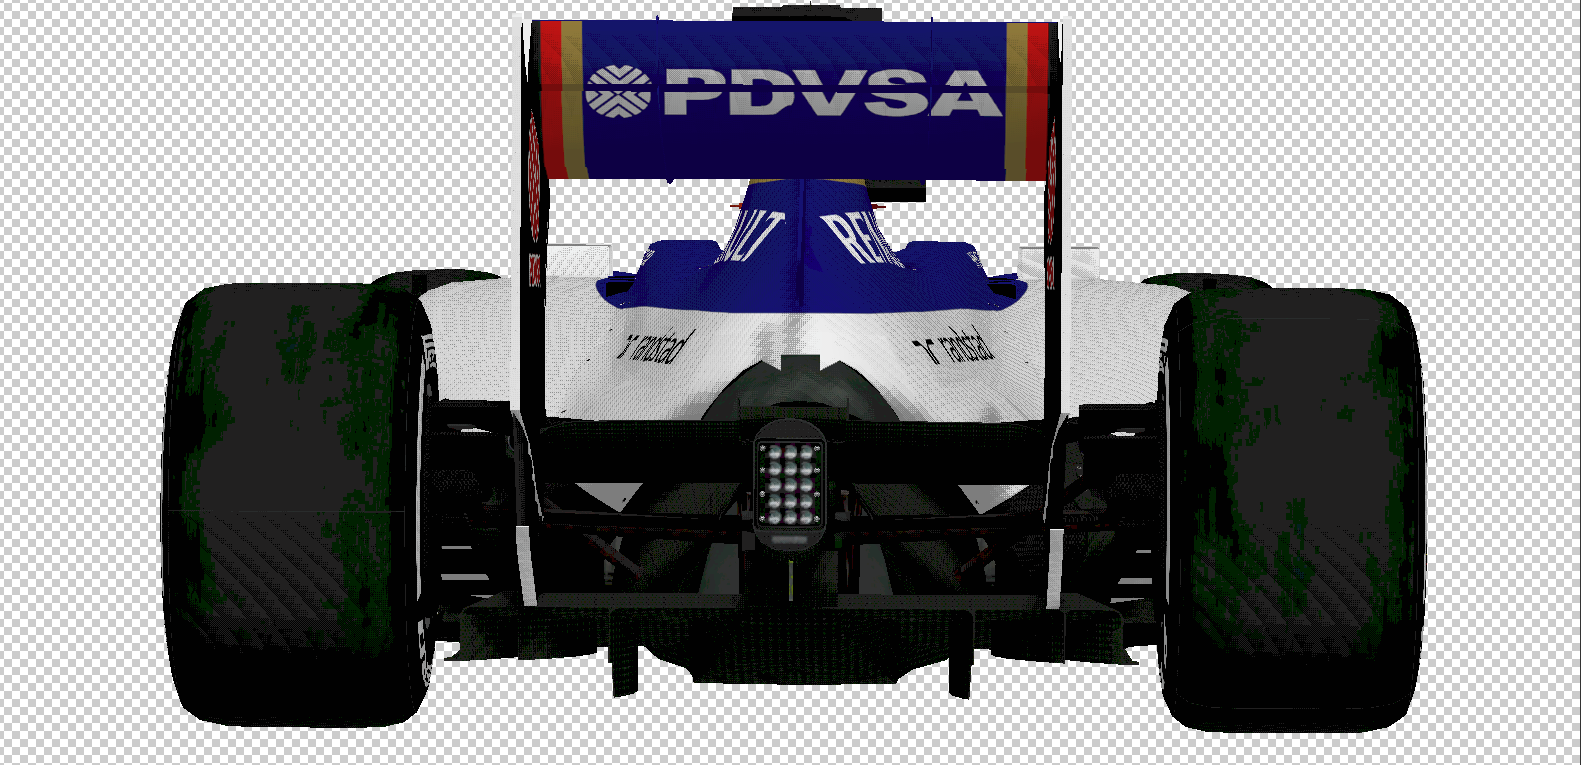 Rothmans-ish Williams Rear.PNG